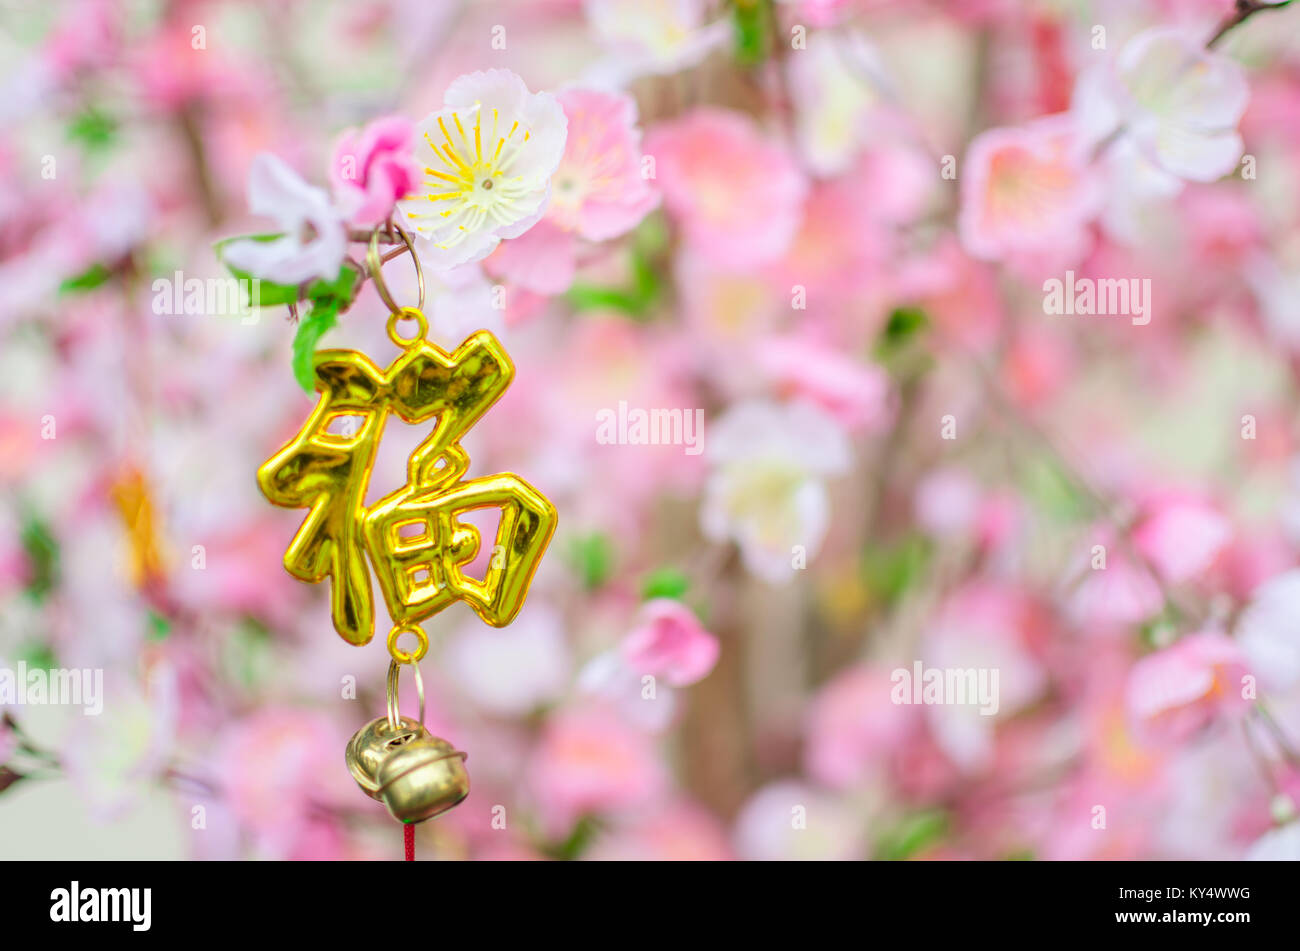 Prosperity. The character Fú (福）meaning 'fortune' or 'good luck'. Very common decoration during Chinese New Year. Stock Photo